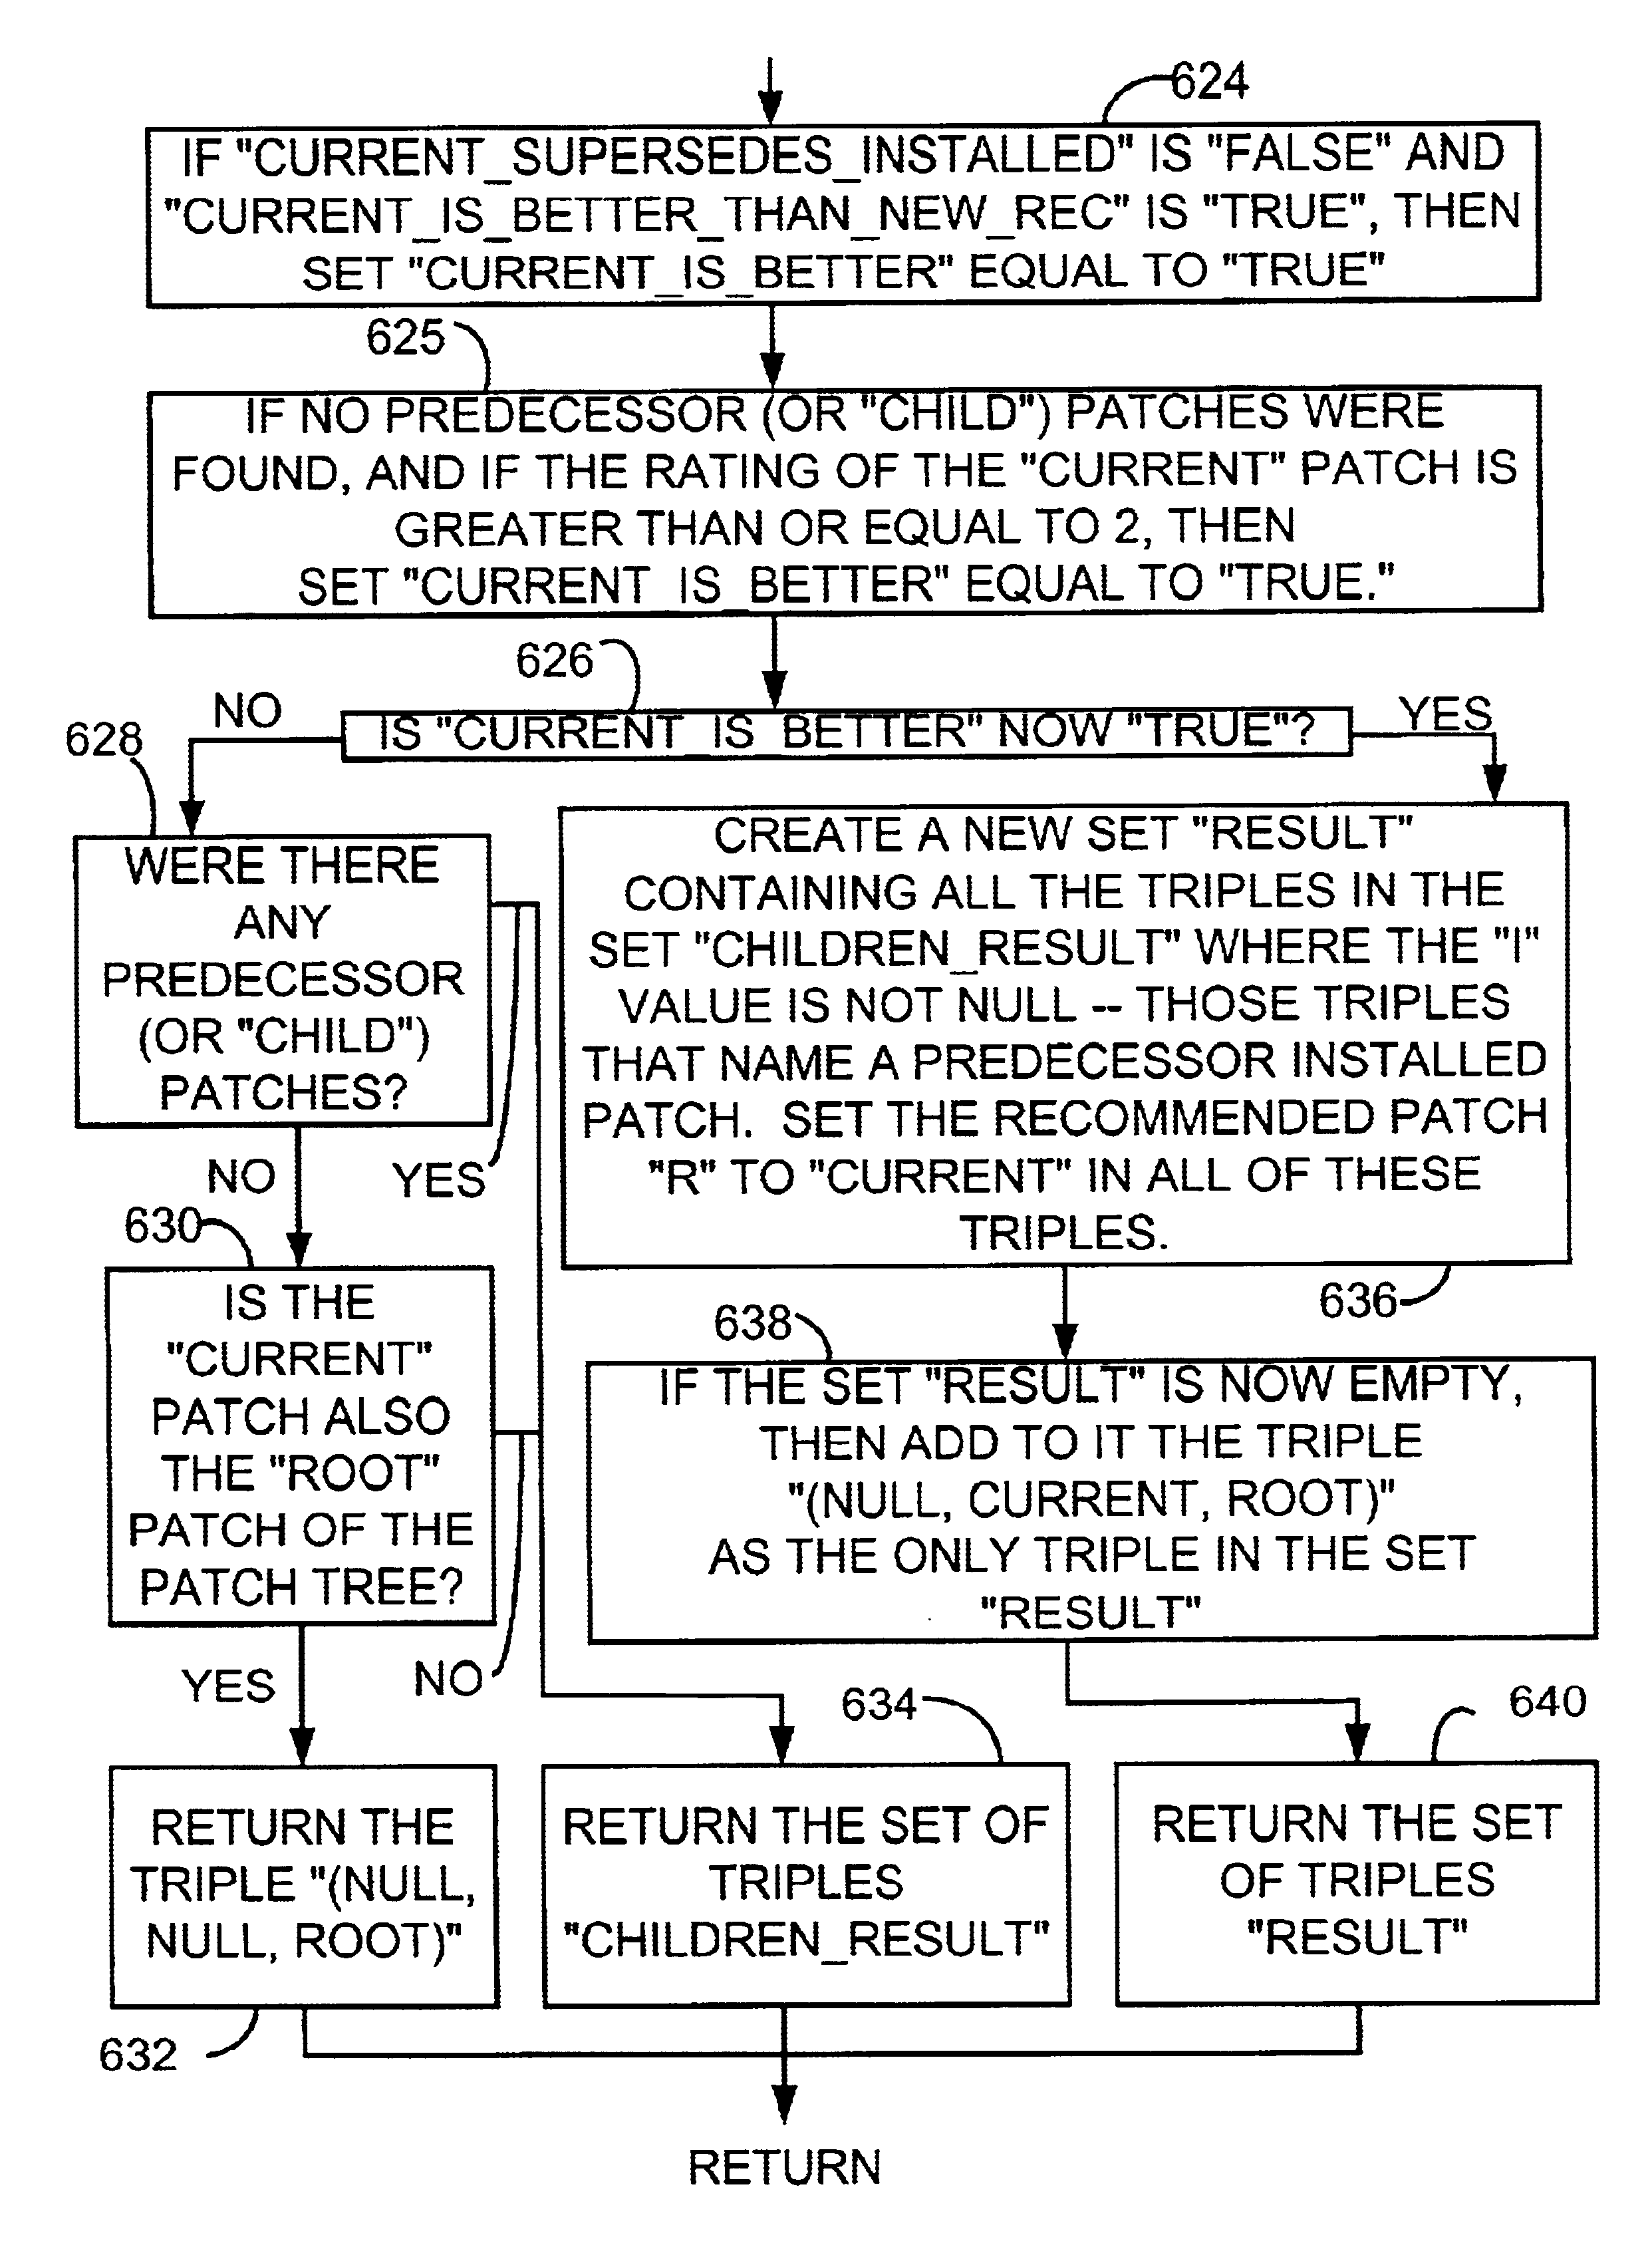 Method for selecting a set of patches to update a system of programs